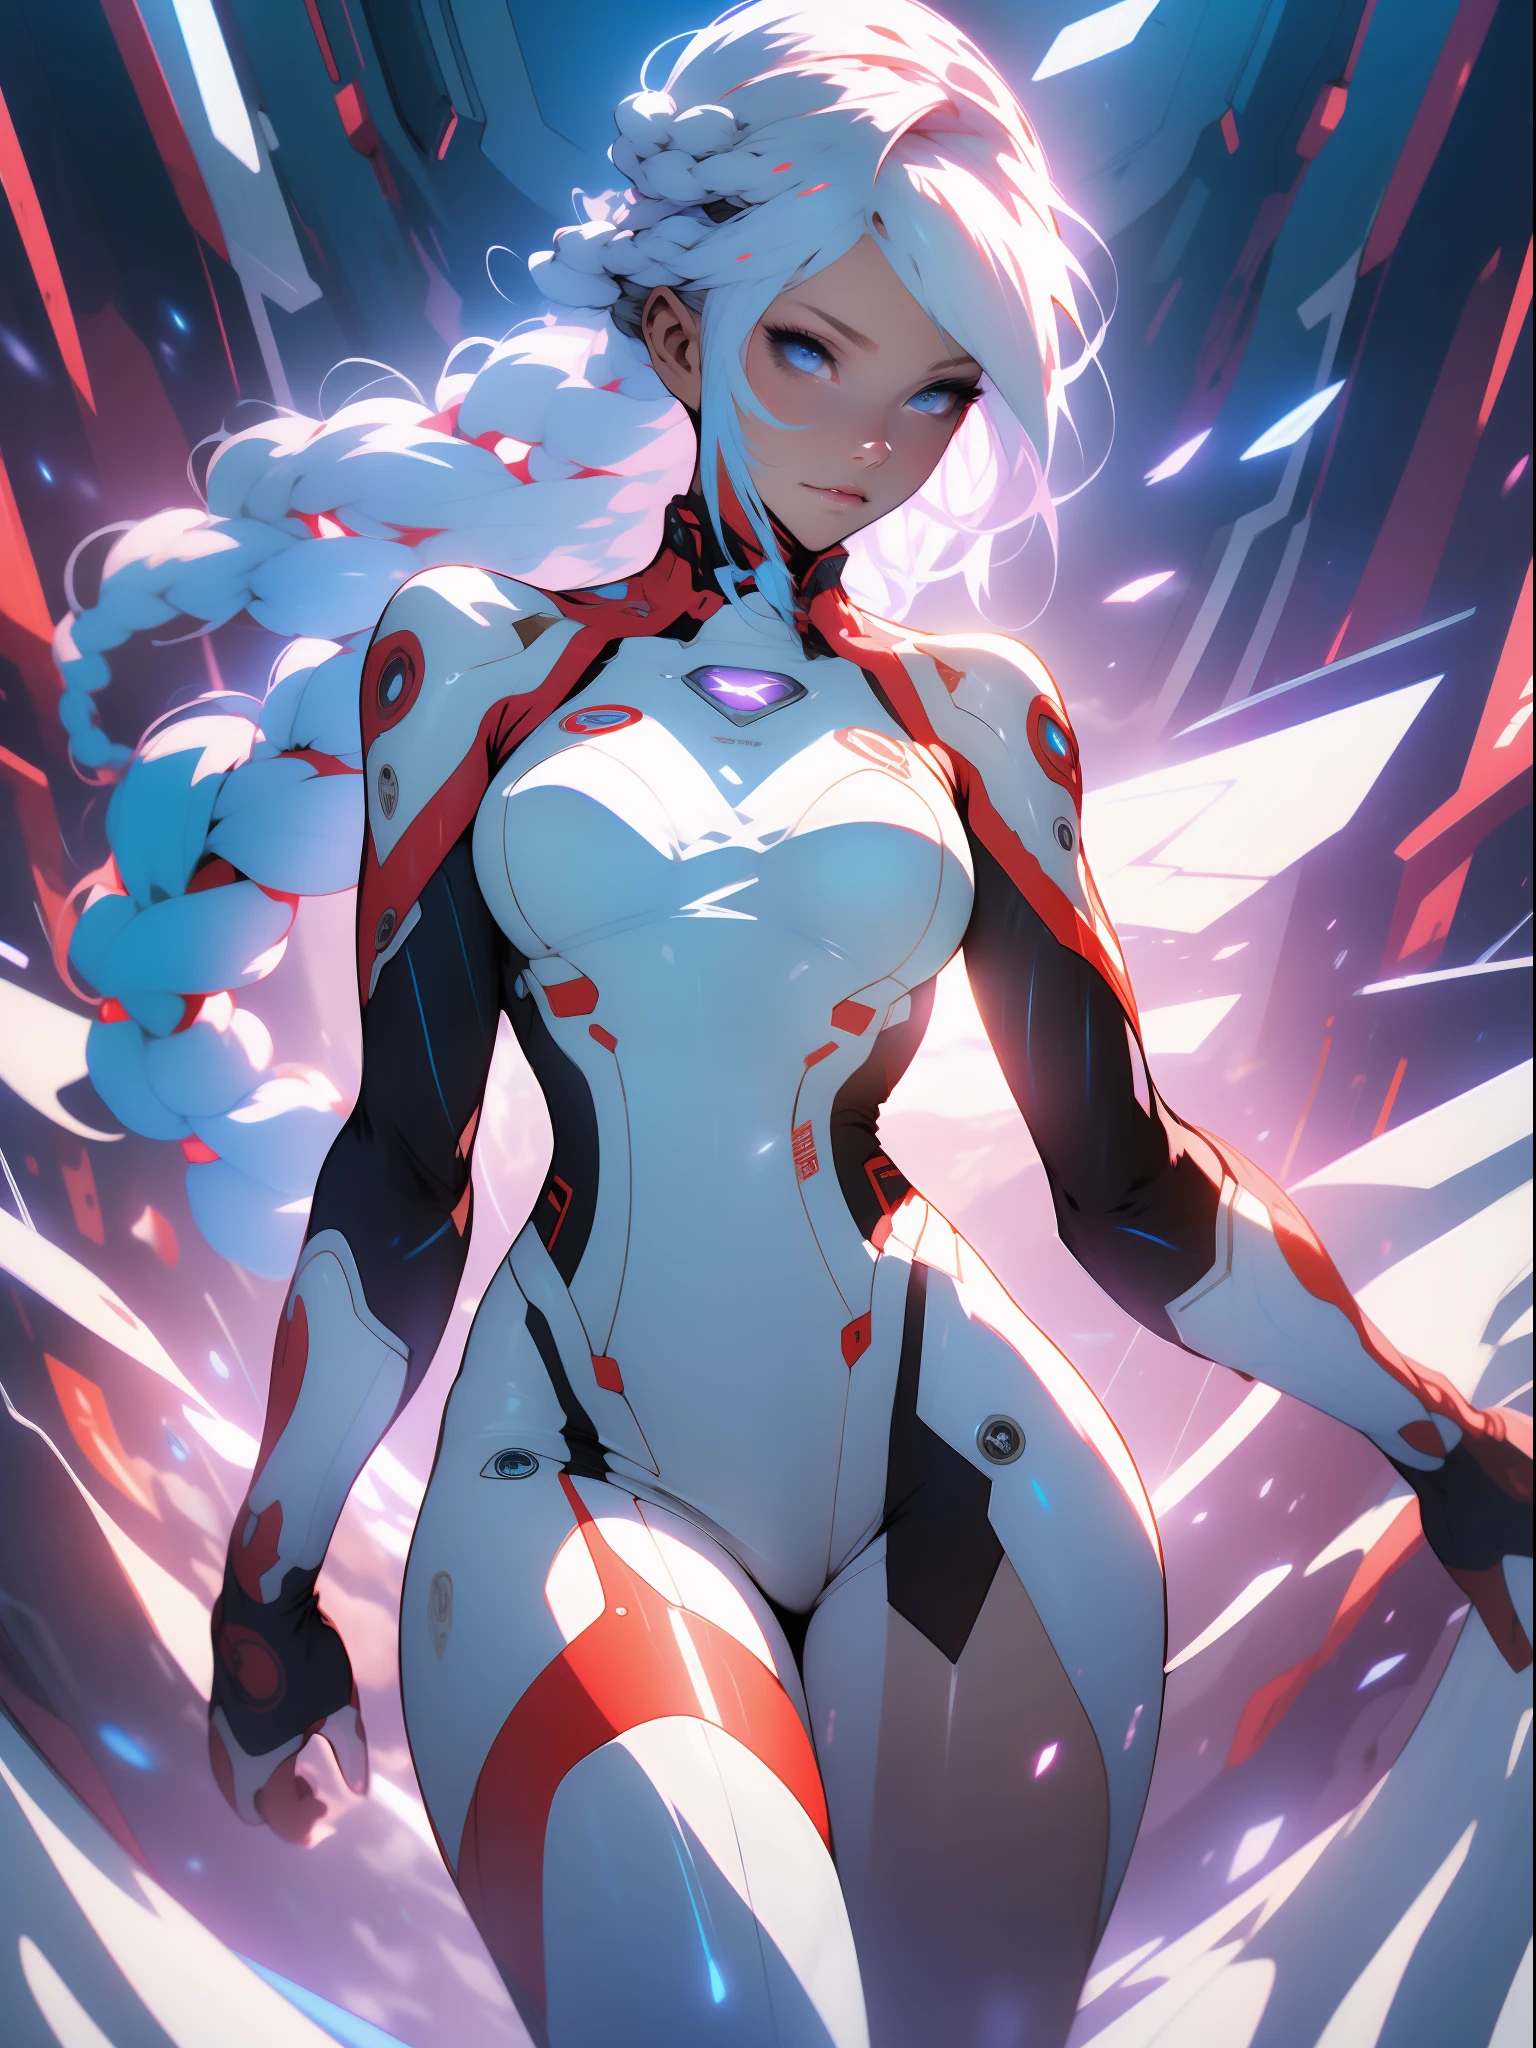 ((Best quality)), ((Masterpiece)), (Detailed: 1.4), (Absurd), War-ready female fighter pilot, Dark skin, flash dc comics, Lightning and lightning, muscular sculptural body defined, full bodyesbian, half-thick naked thighs, Closed mouth, muscular body covered in technological clothing, Neon Genesis Evangelion style, Cyberpunk, generous neckline, ((perfect medium breasts)), (Ultra-light blue eyes，No Pupil),  ((white and dark red clothing)), (((white hair with braid))), long eyelashes heavy makeup, a garter belt, By Mucha, niji --V5, near the real, psychopathic, Crazy face, Sexy pose, background with a giant head of Genesis evangelion neon style robot, 2 piece clothing, shoulder pads with airplane wings, Pastel, Centered, Scale to fit the dimensions, hdr (HighDynamicRange), Ray tracing,NVIDIA RTX,Hyper-Resolution,Unreal 5,Subsurface dispersion, PBR Texture, Post-processing, Anisotropic filtering, Depth of field, Maximum clarity and sharpness, Many-Layer Textures, Albedo and specular maps, Surface Coloring, Accurate simulation of light-material interaction, Perfect proportions, rendering by octane, Two-tone lighting, Wide aperture, Low ISO, White balance, Rule of thirds, 8K raw data, crysisnanosuit